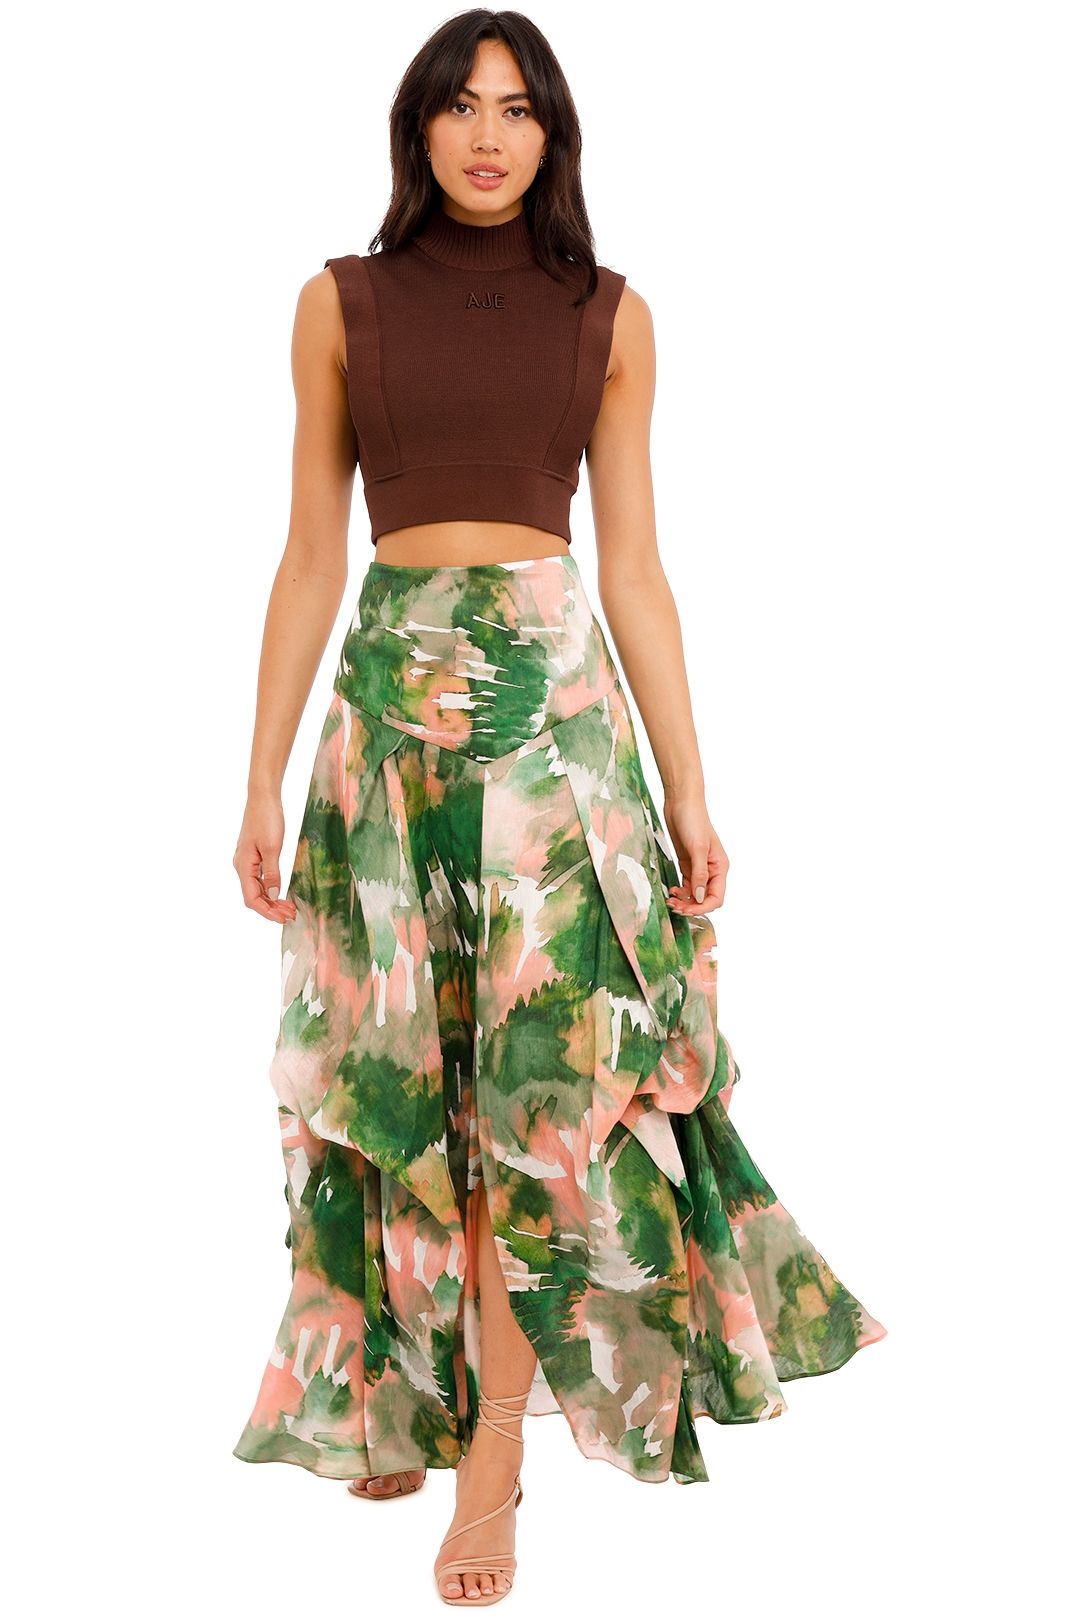 Aquarelle Skirt Ginger and Smart maxi